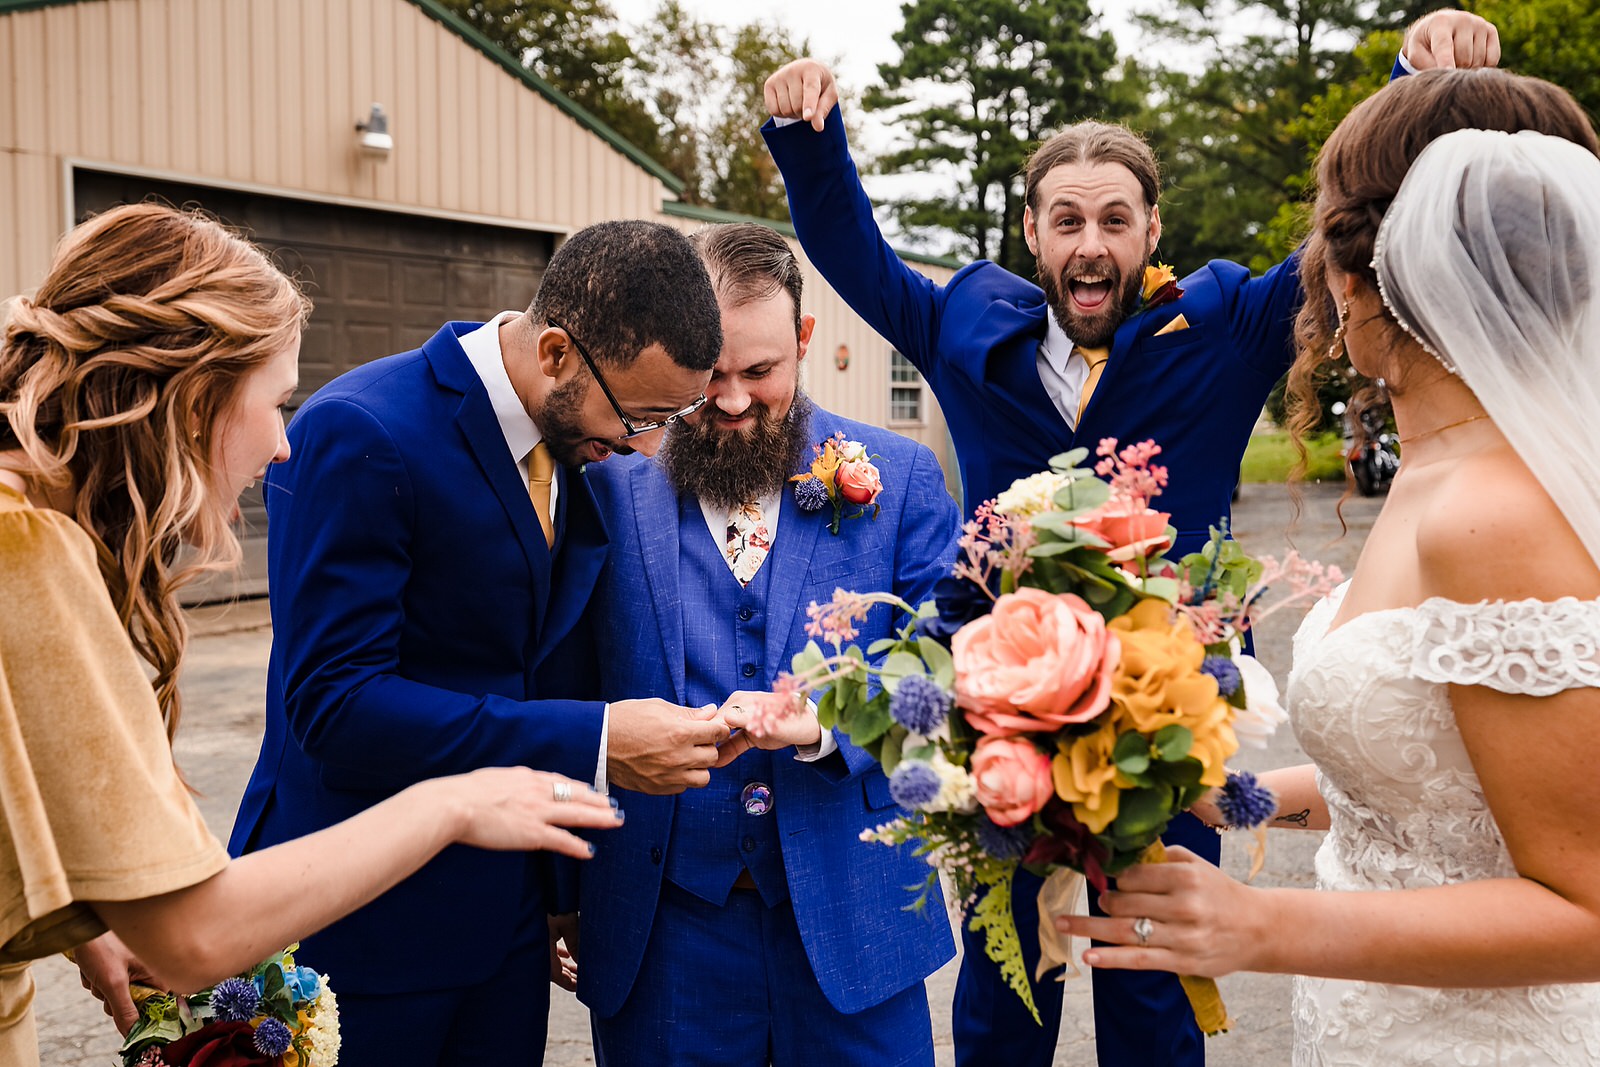 Groom shows off his new wedding ring to groomsmen